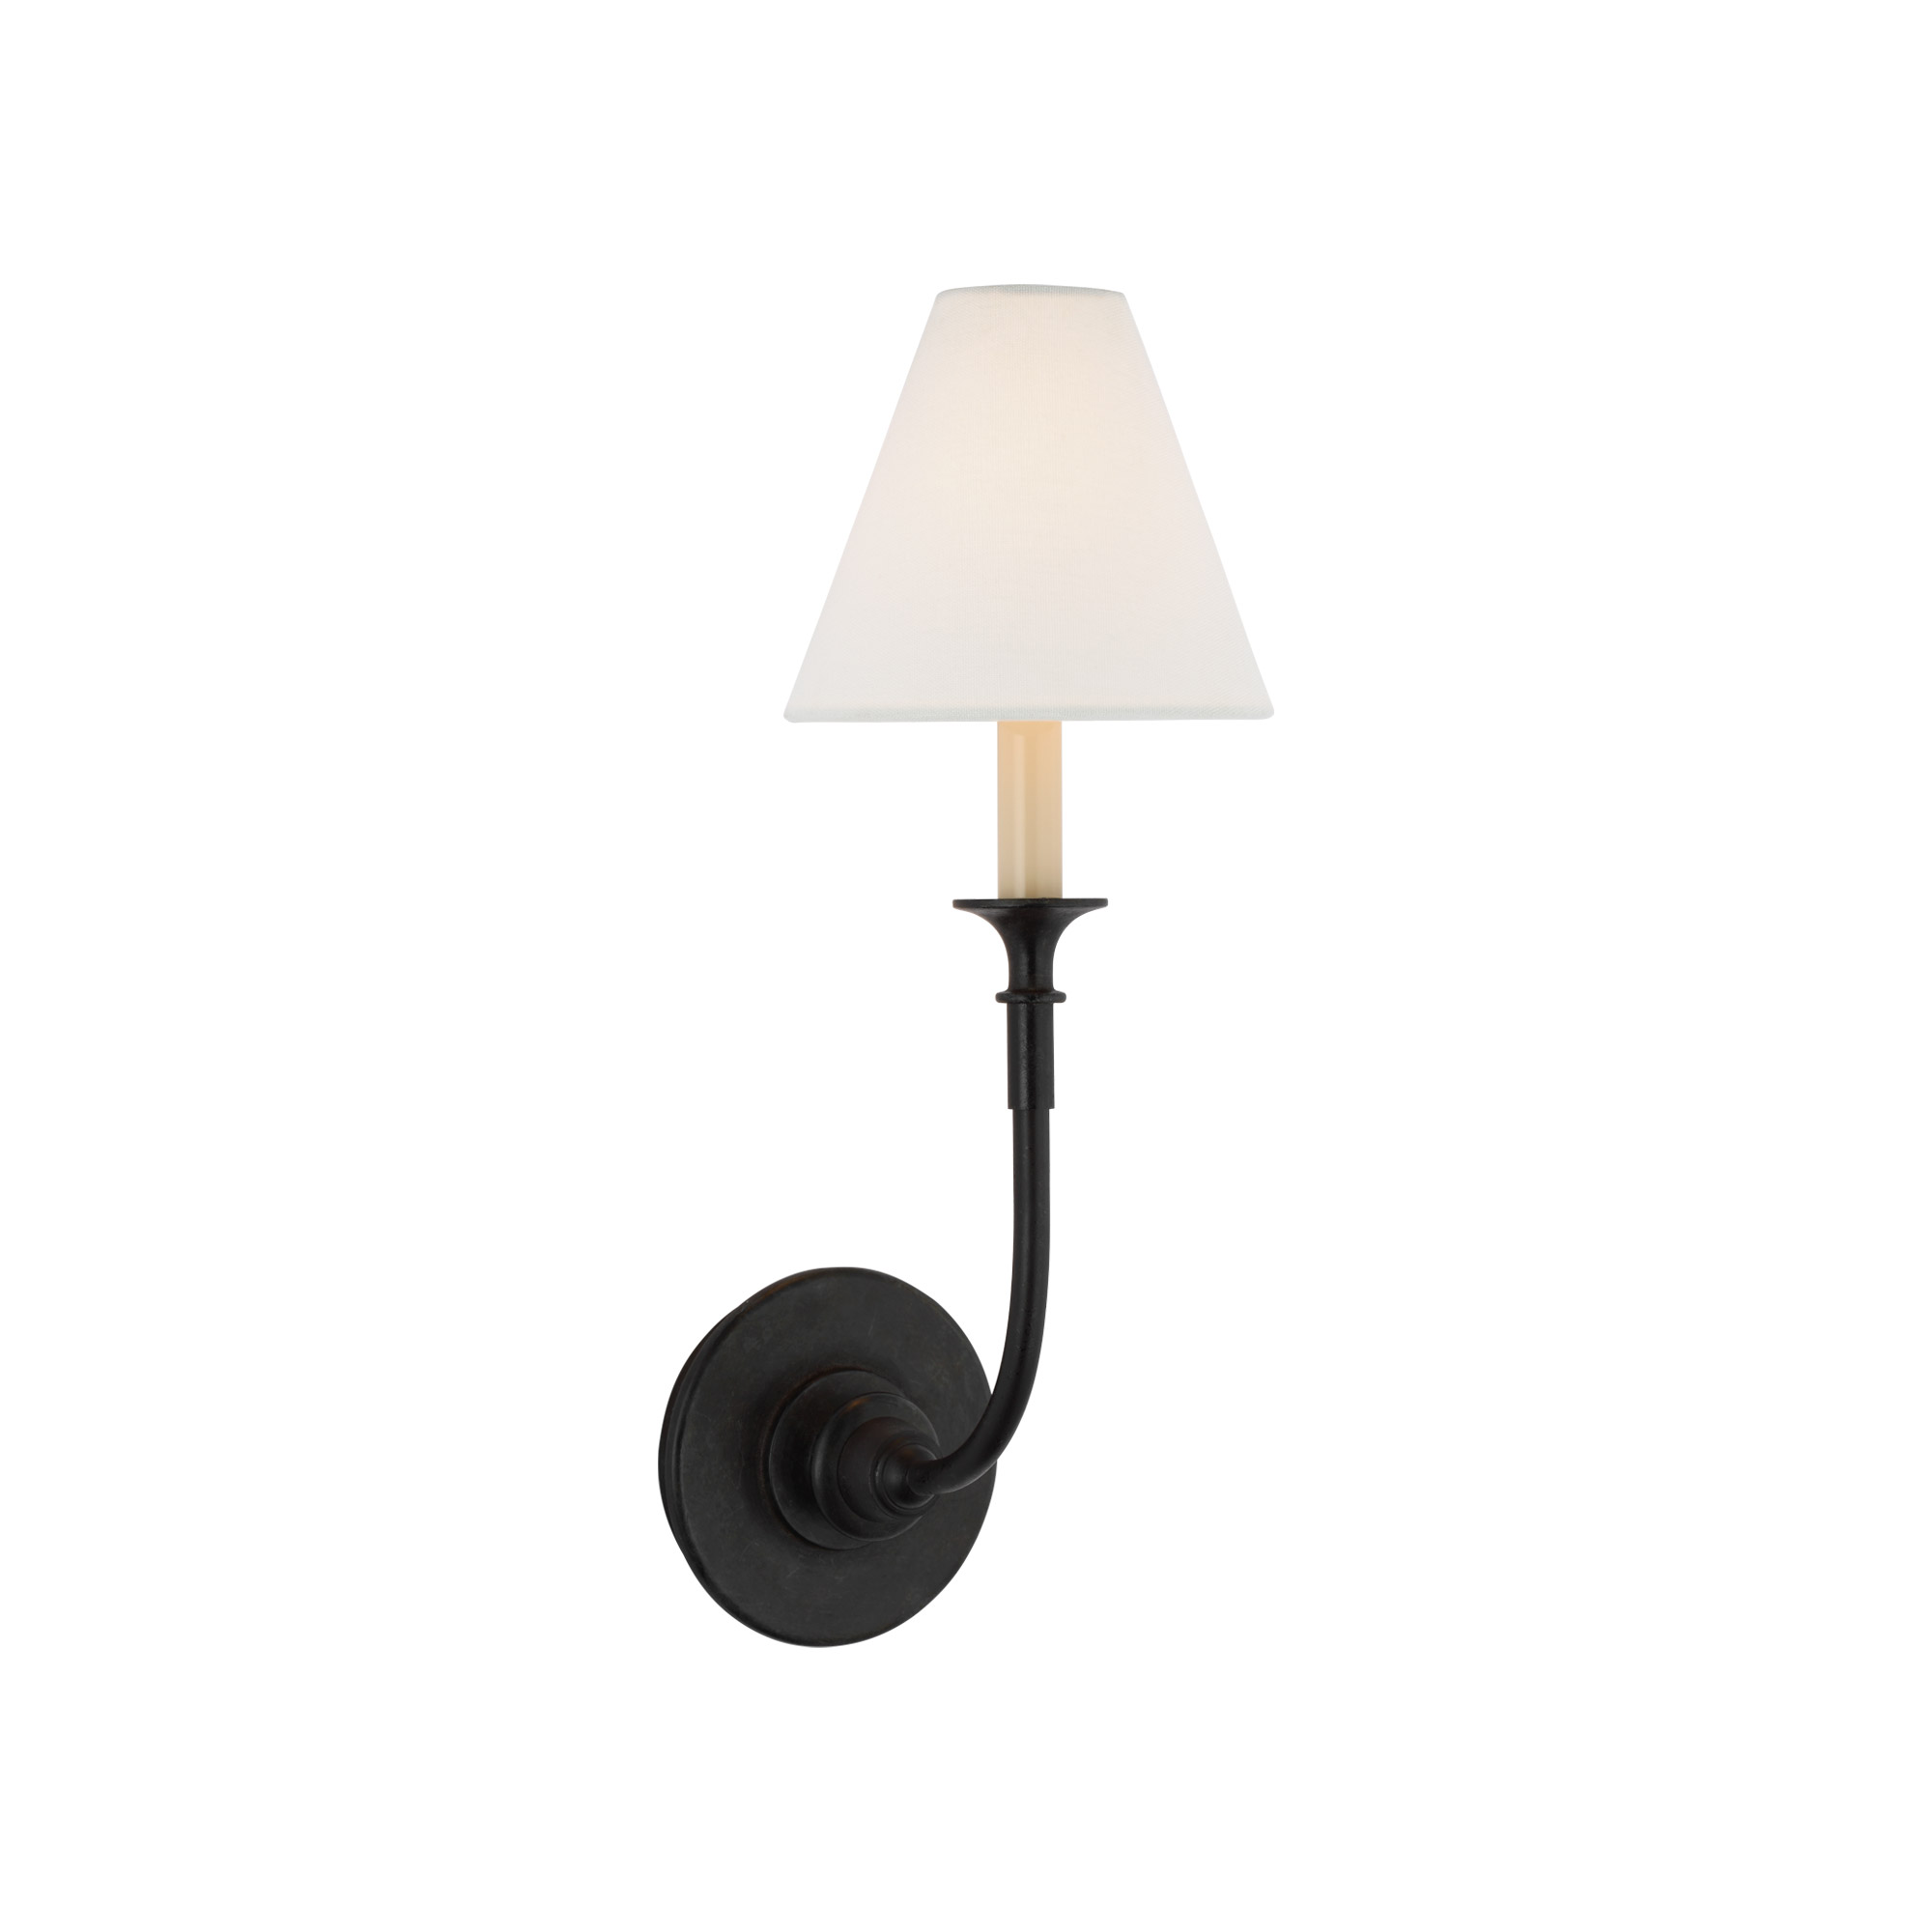 Piaf Single Wall Sconce (Aged Iron) - Bloomingdales Lighting